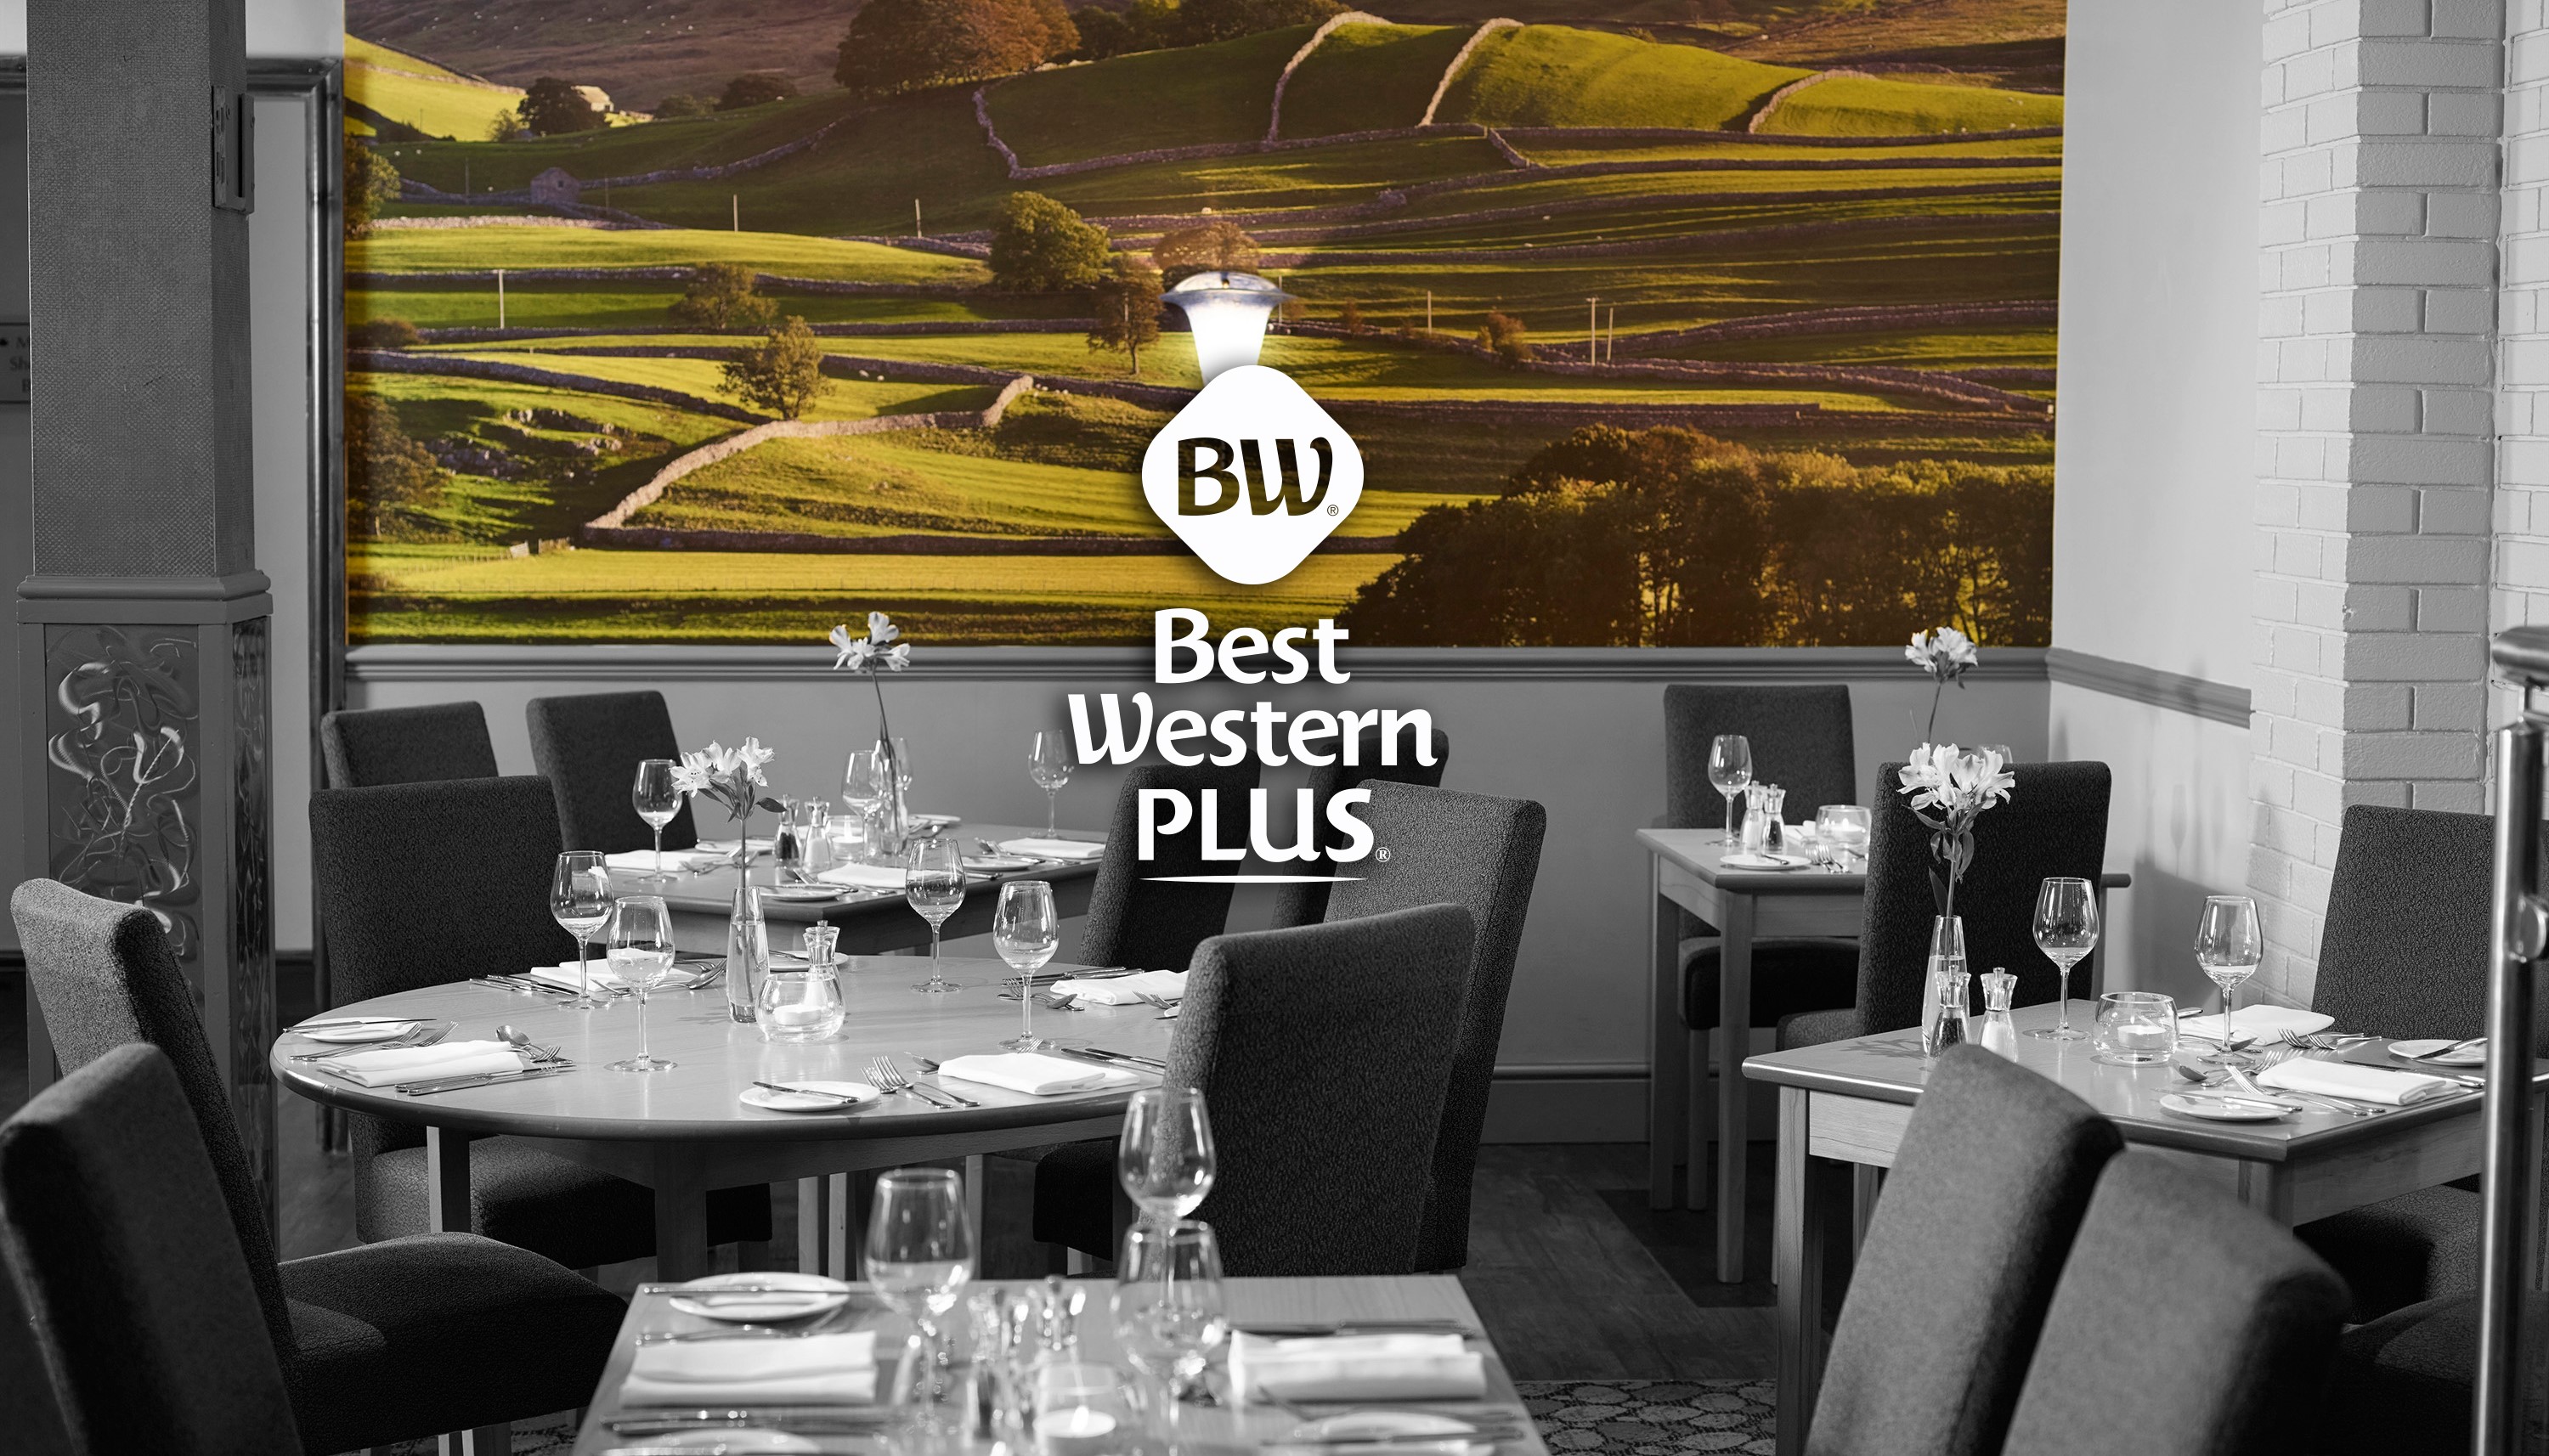 Watermill Restaurant & Bar by Compass Dining, Leeds, United Kingdom